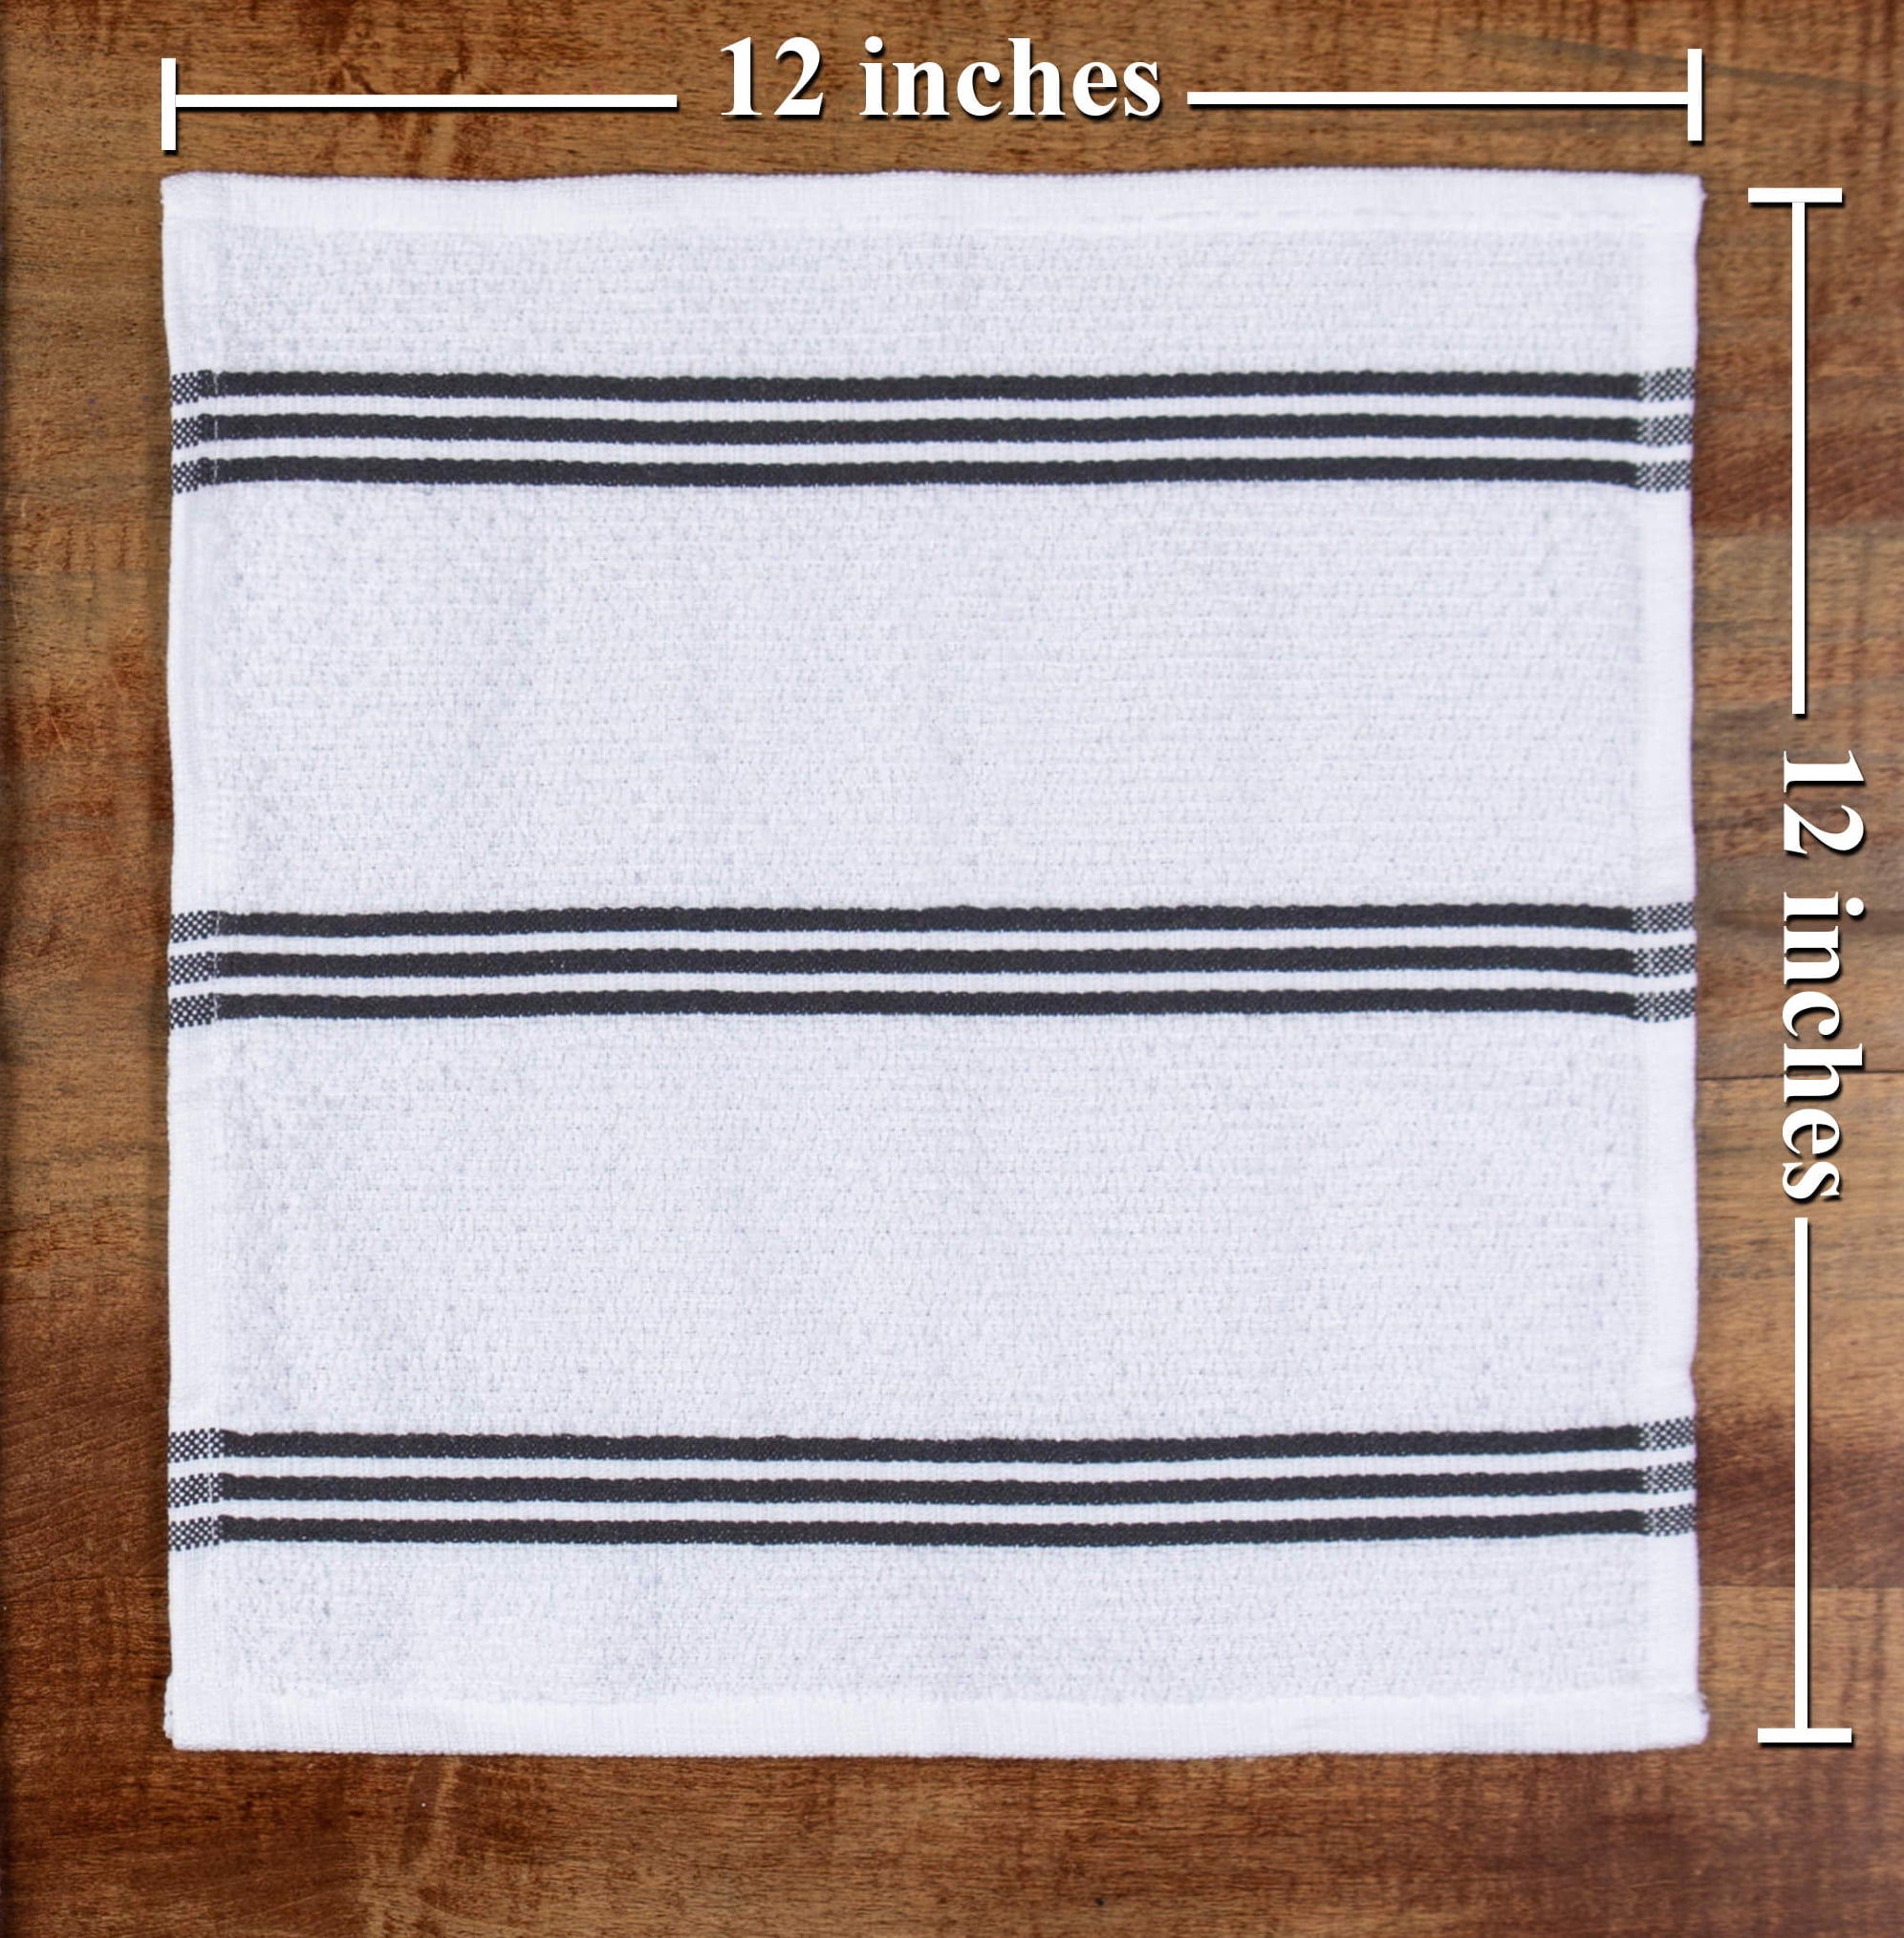 Kitchen Towels 8 Dishcloths Set Solid and Striped Brown White 12